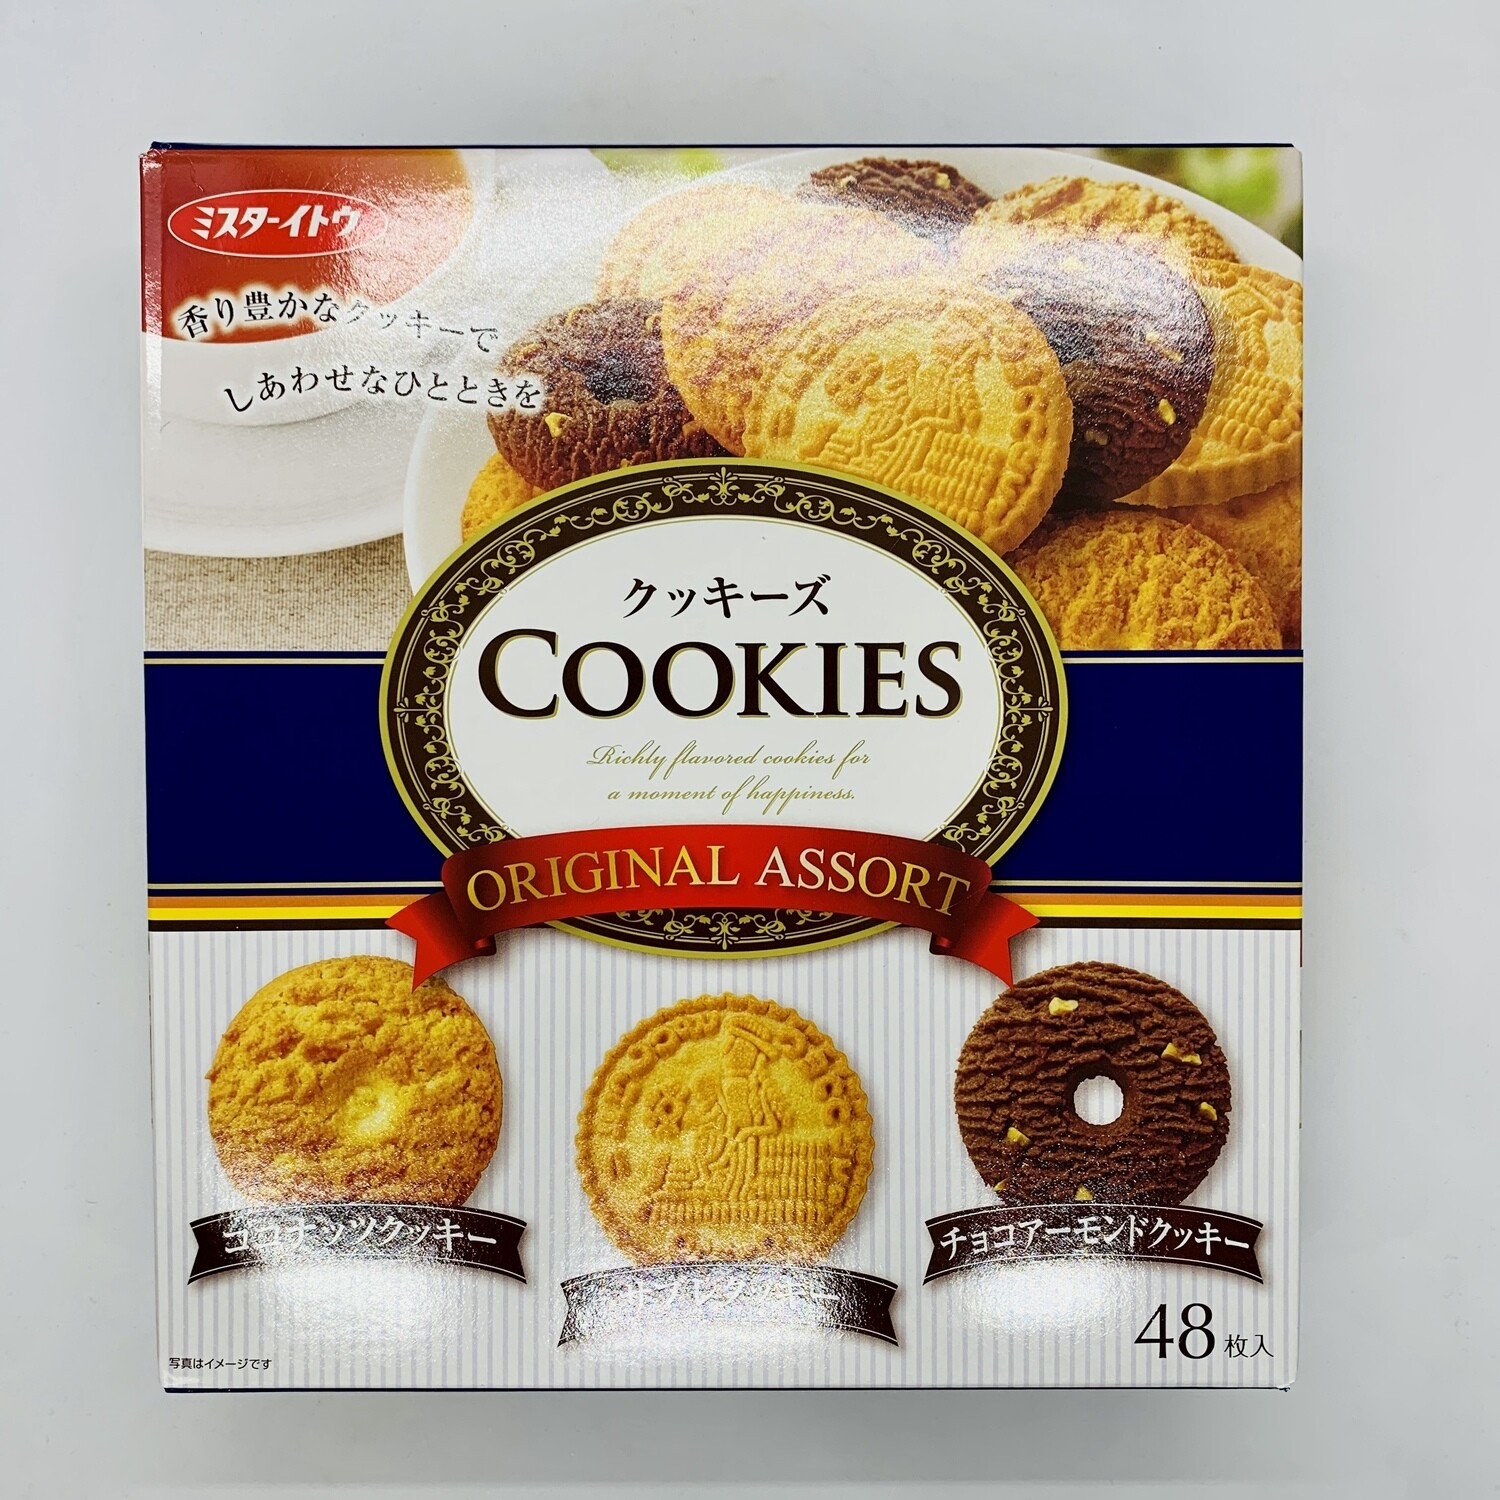 Mr Ito Cookies